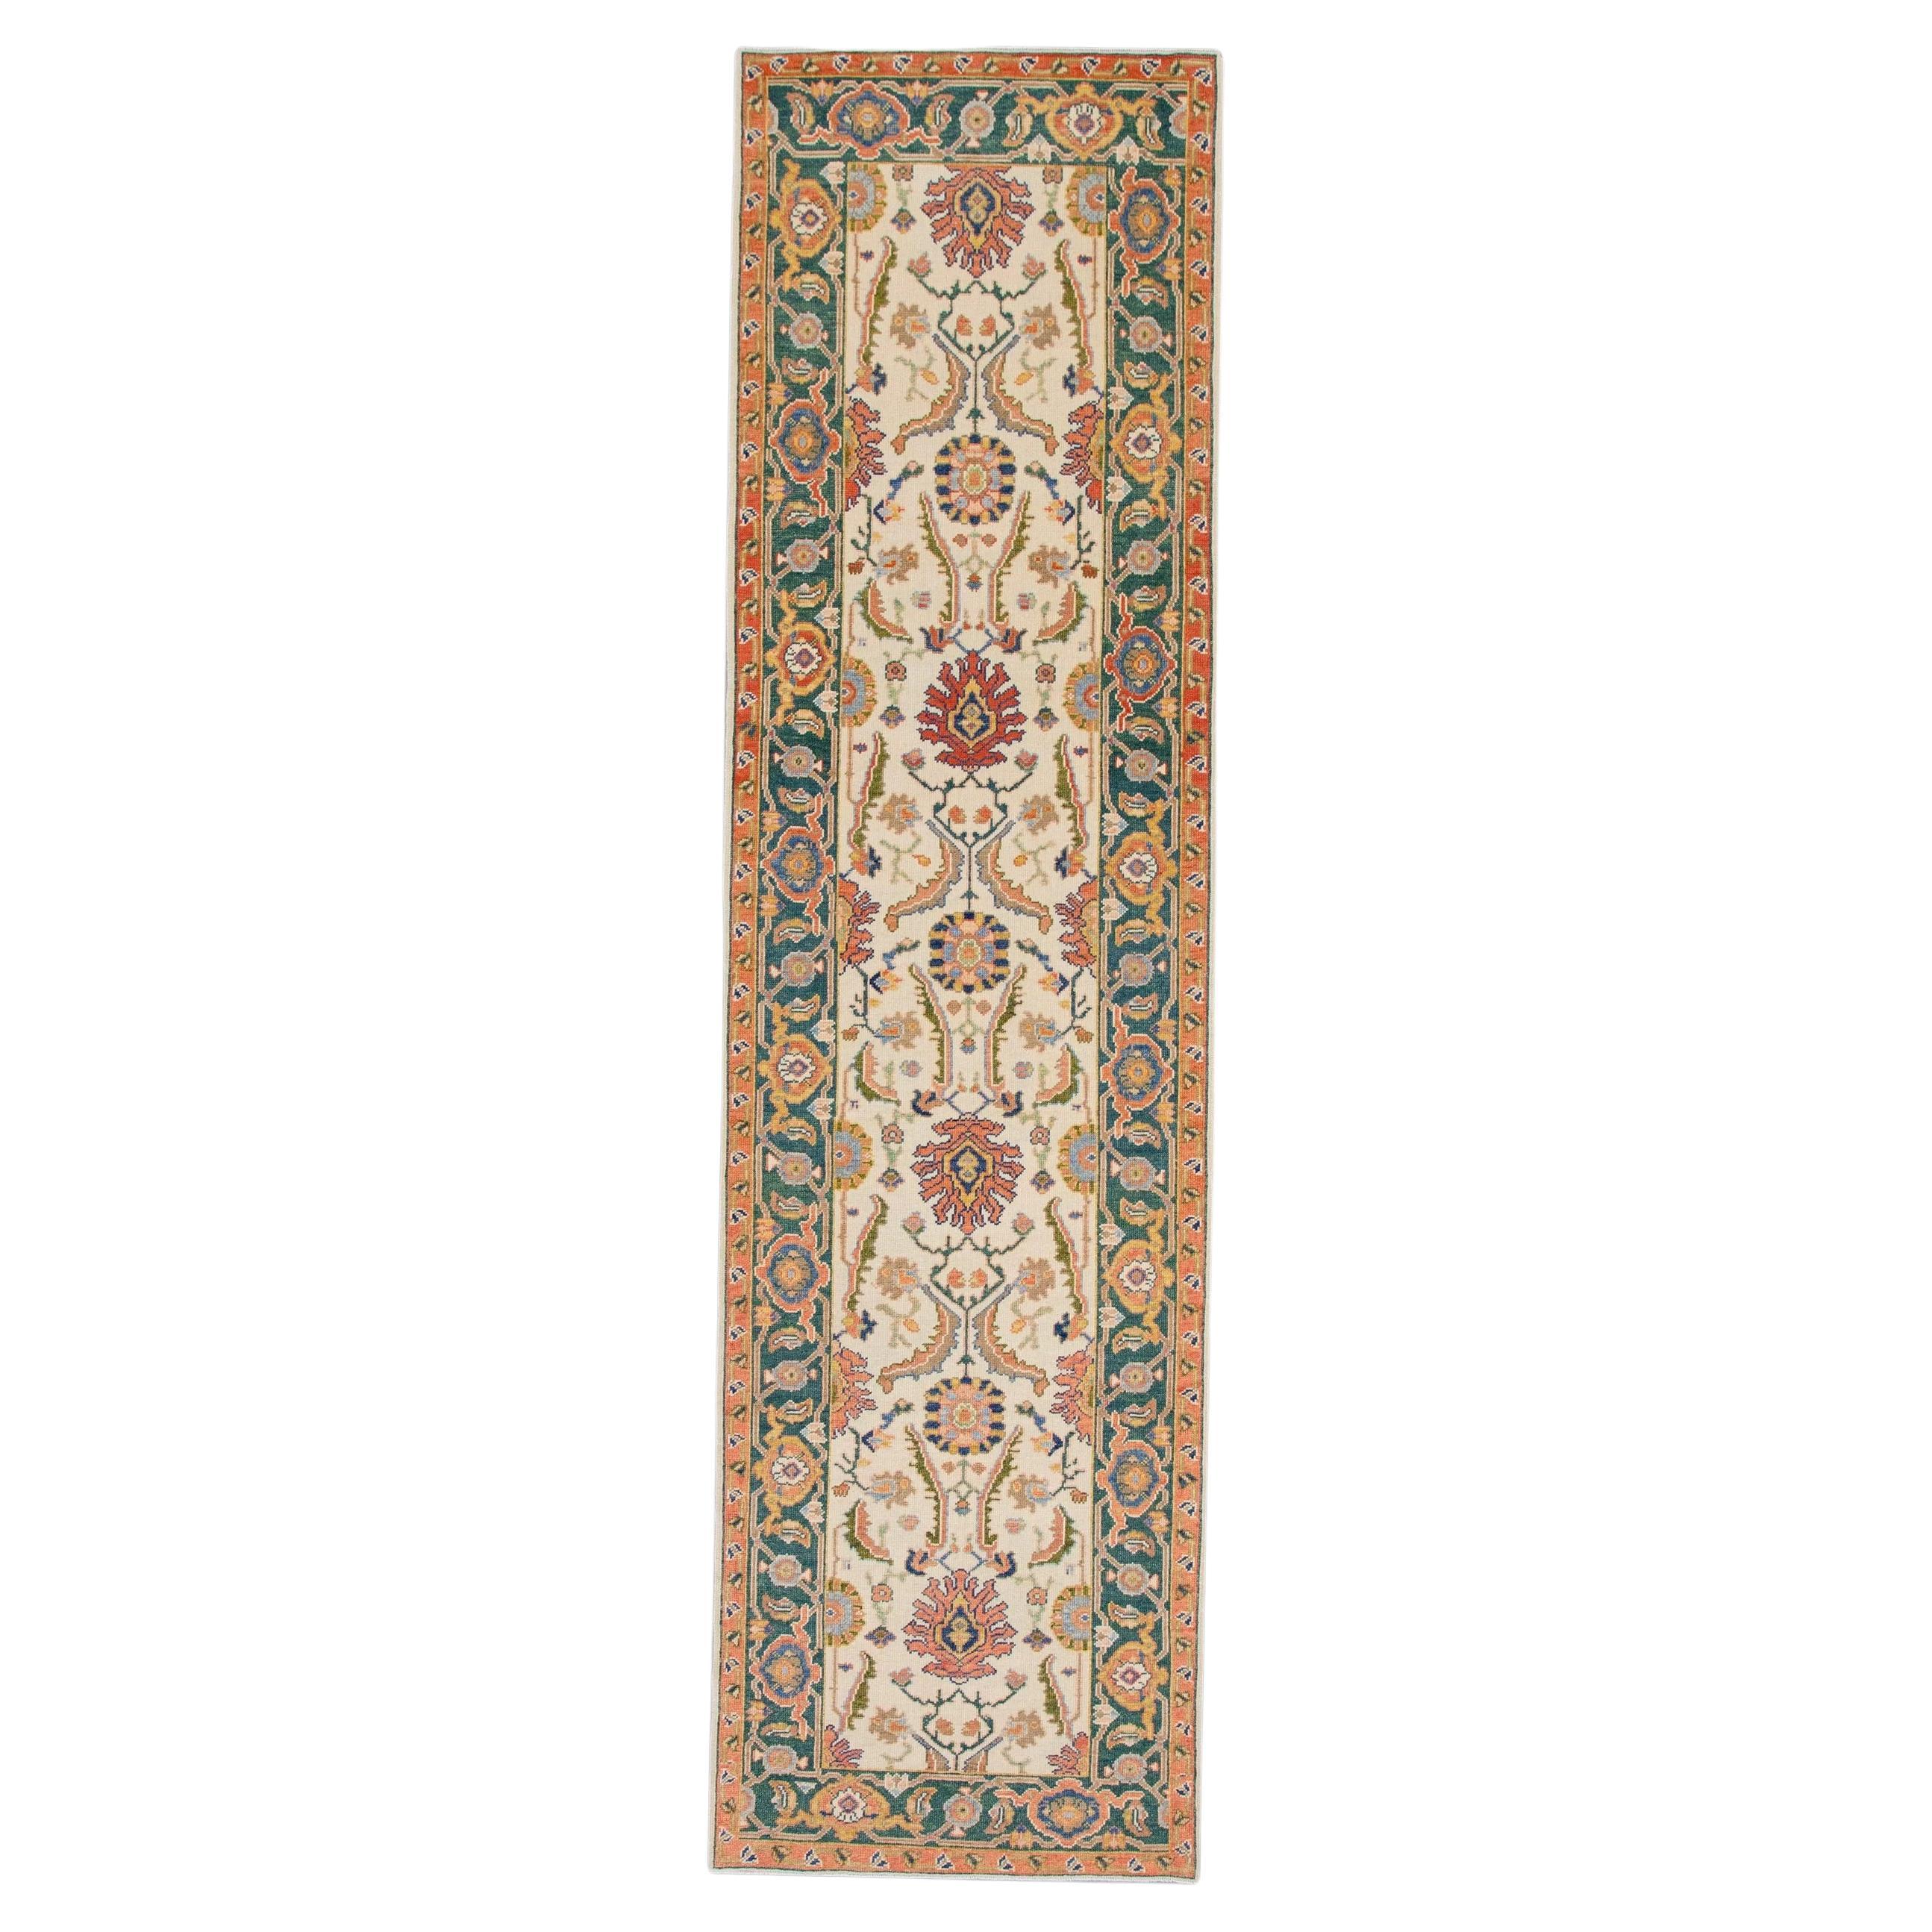 Floral Turkish Finewoven Wool Oushak Rug in Cream, Green, and Red 2'9" x 10'5"